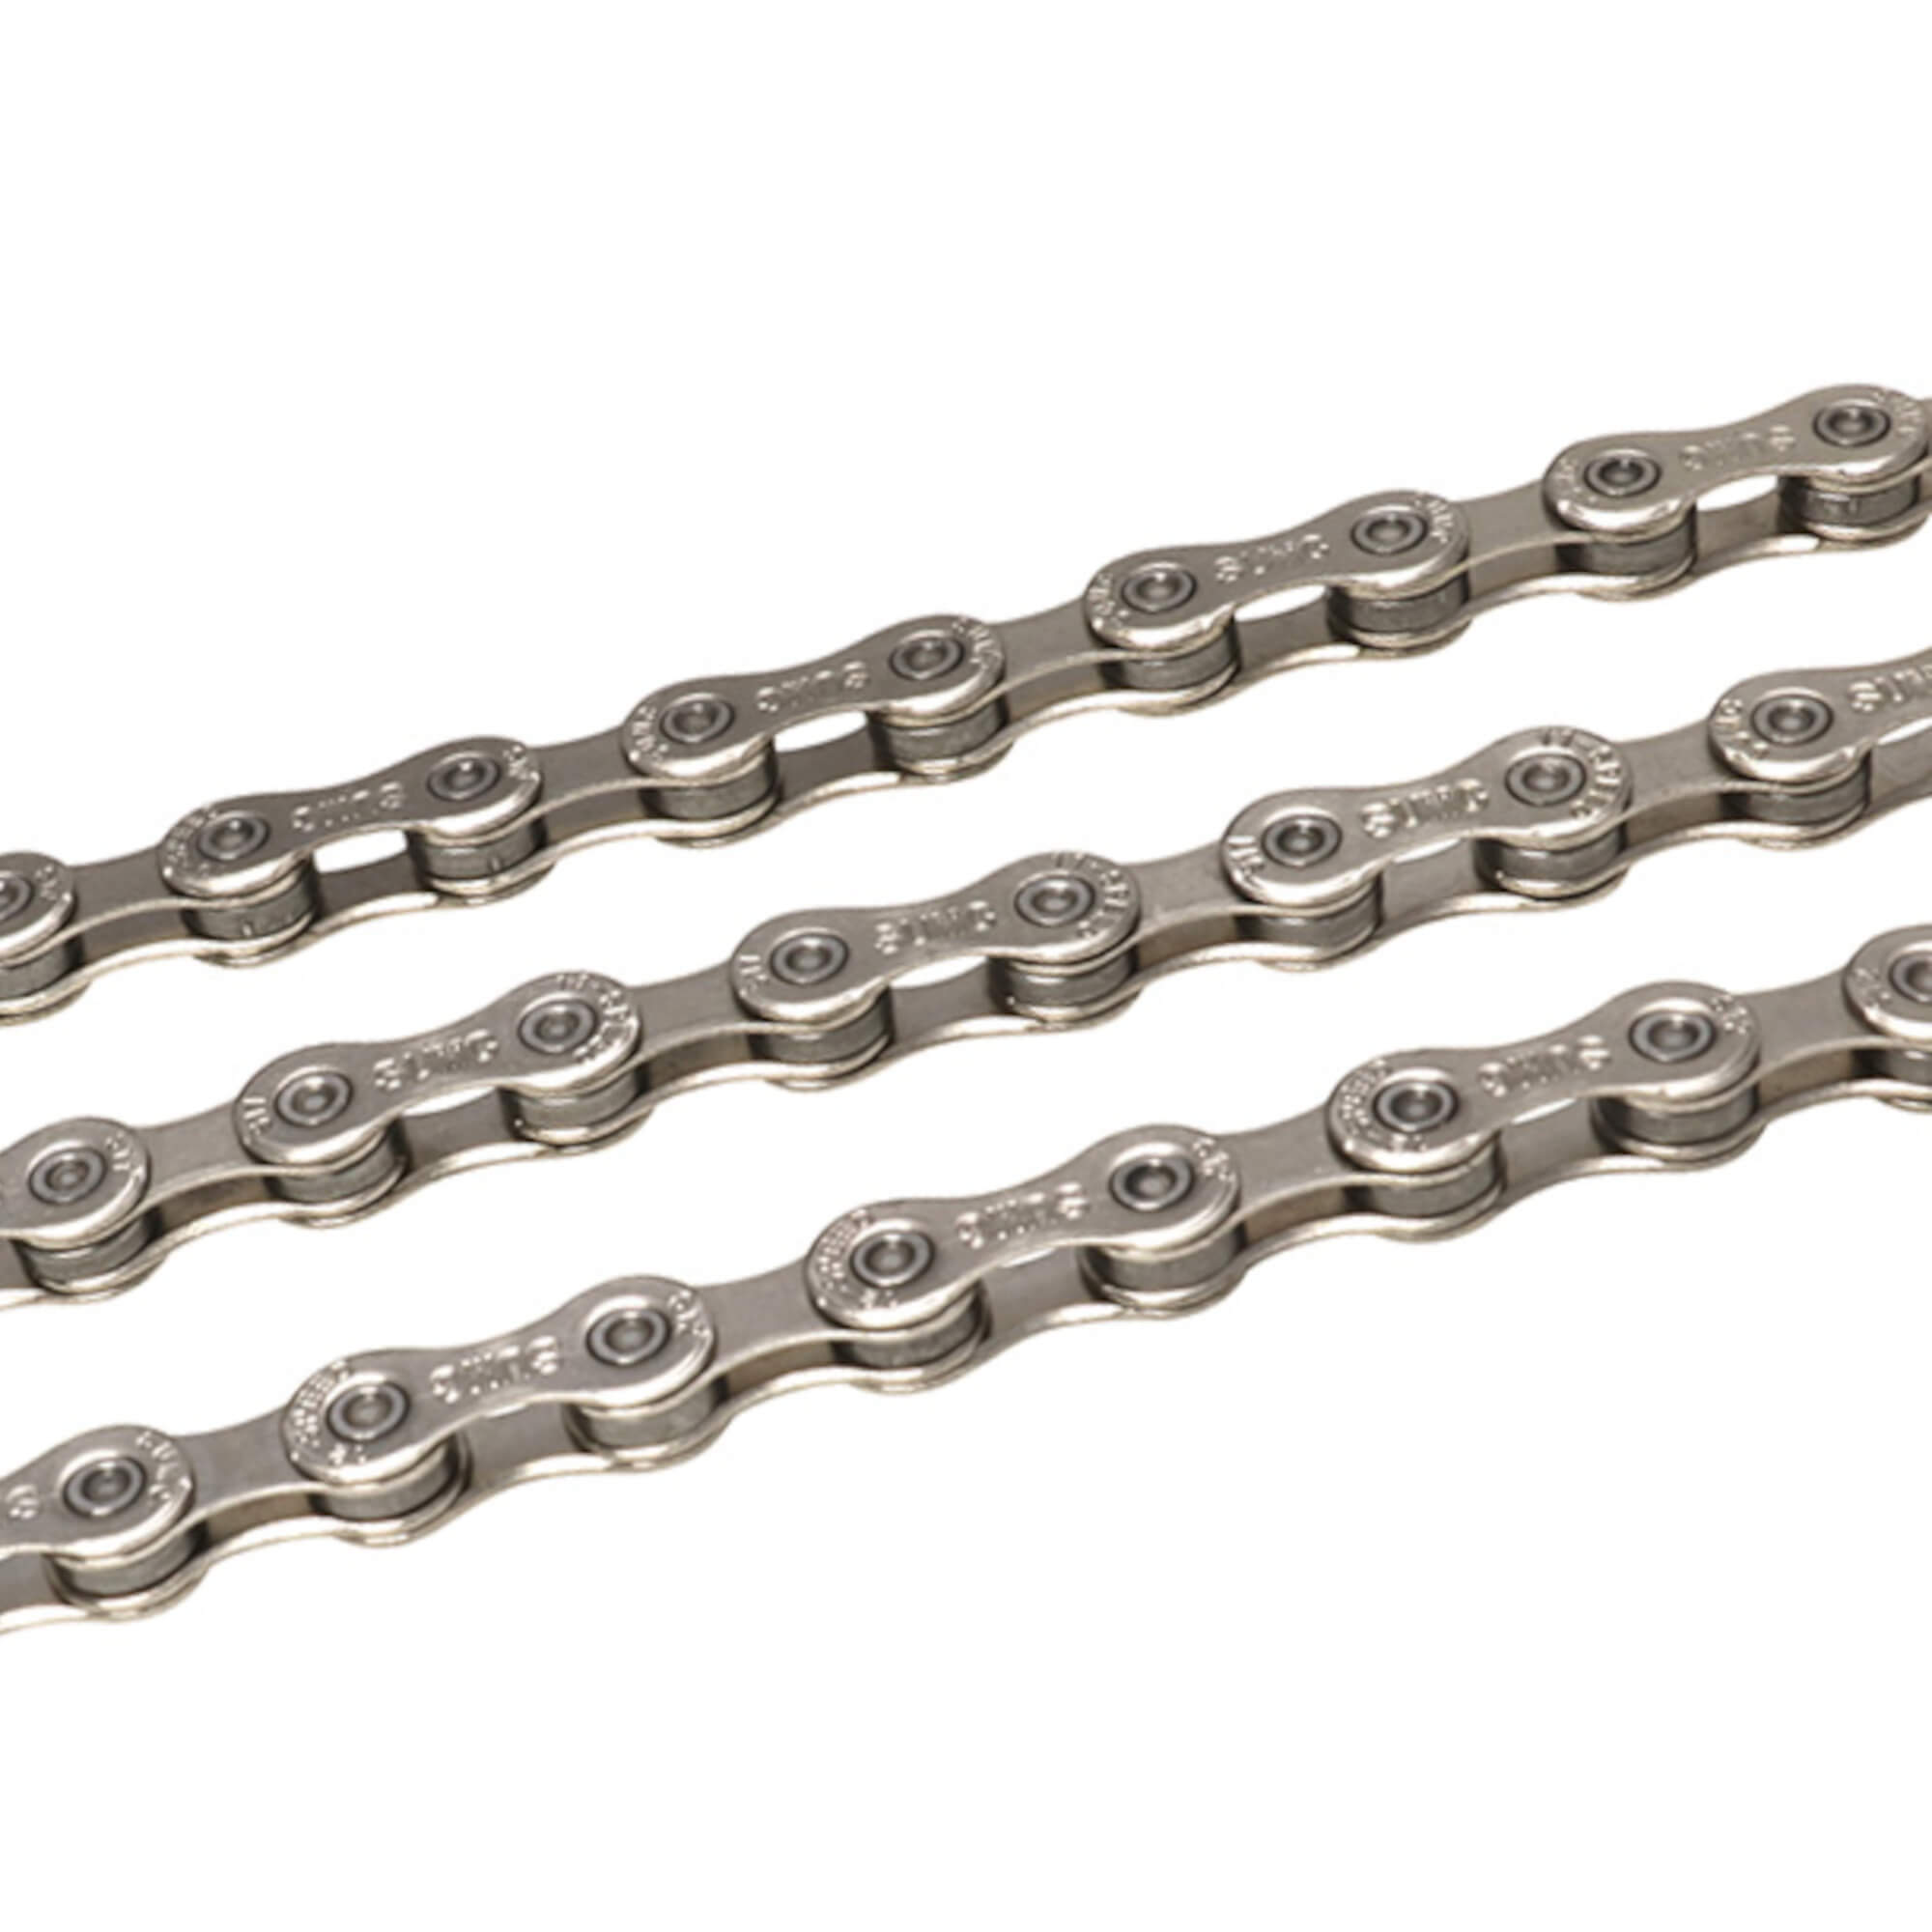 S-Ride Chain CN-M500 Nickel-Plated 11 speed Chain